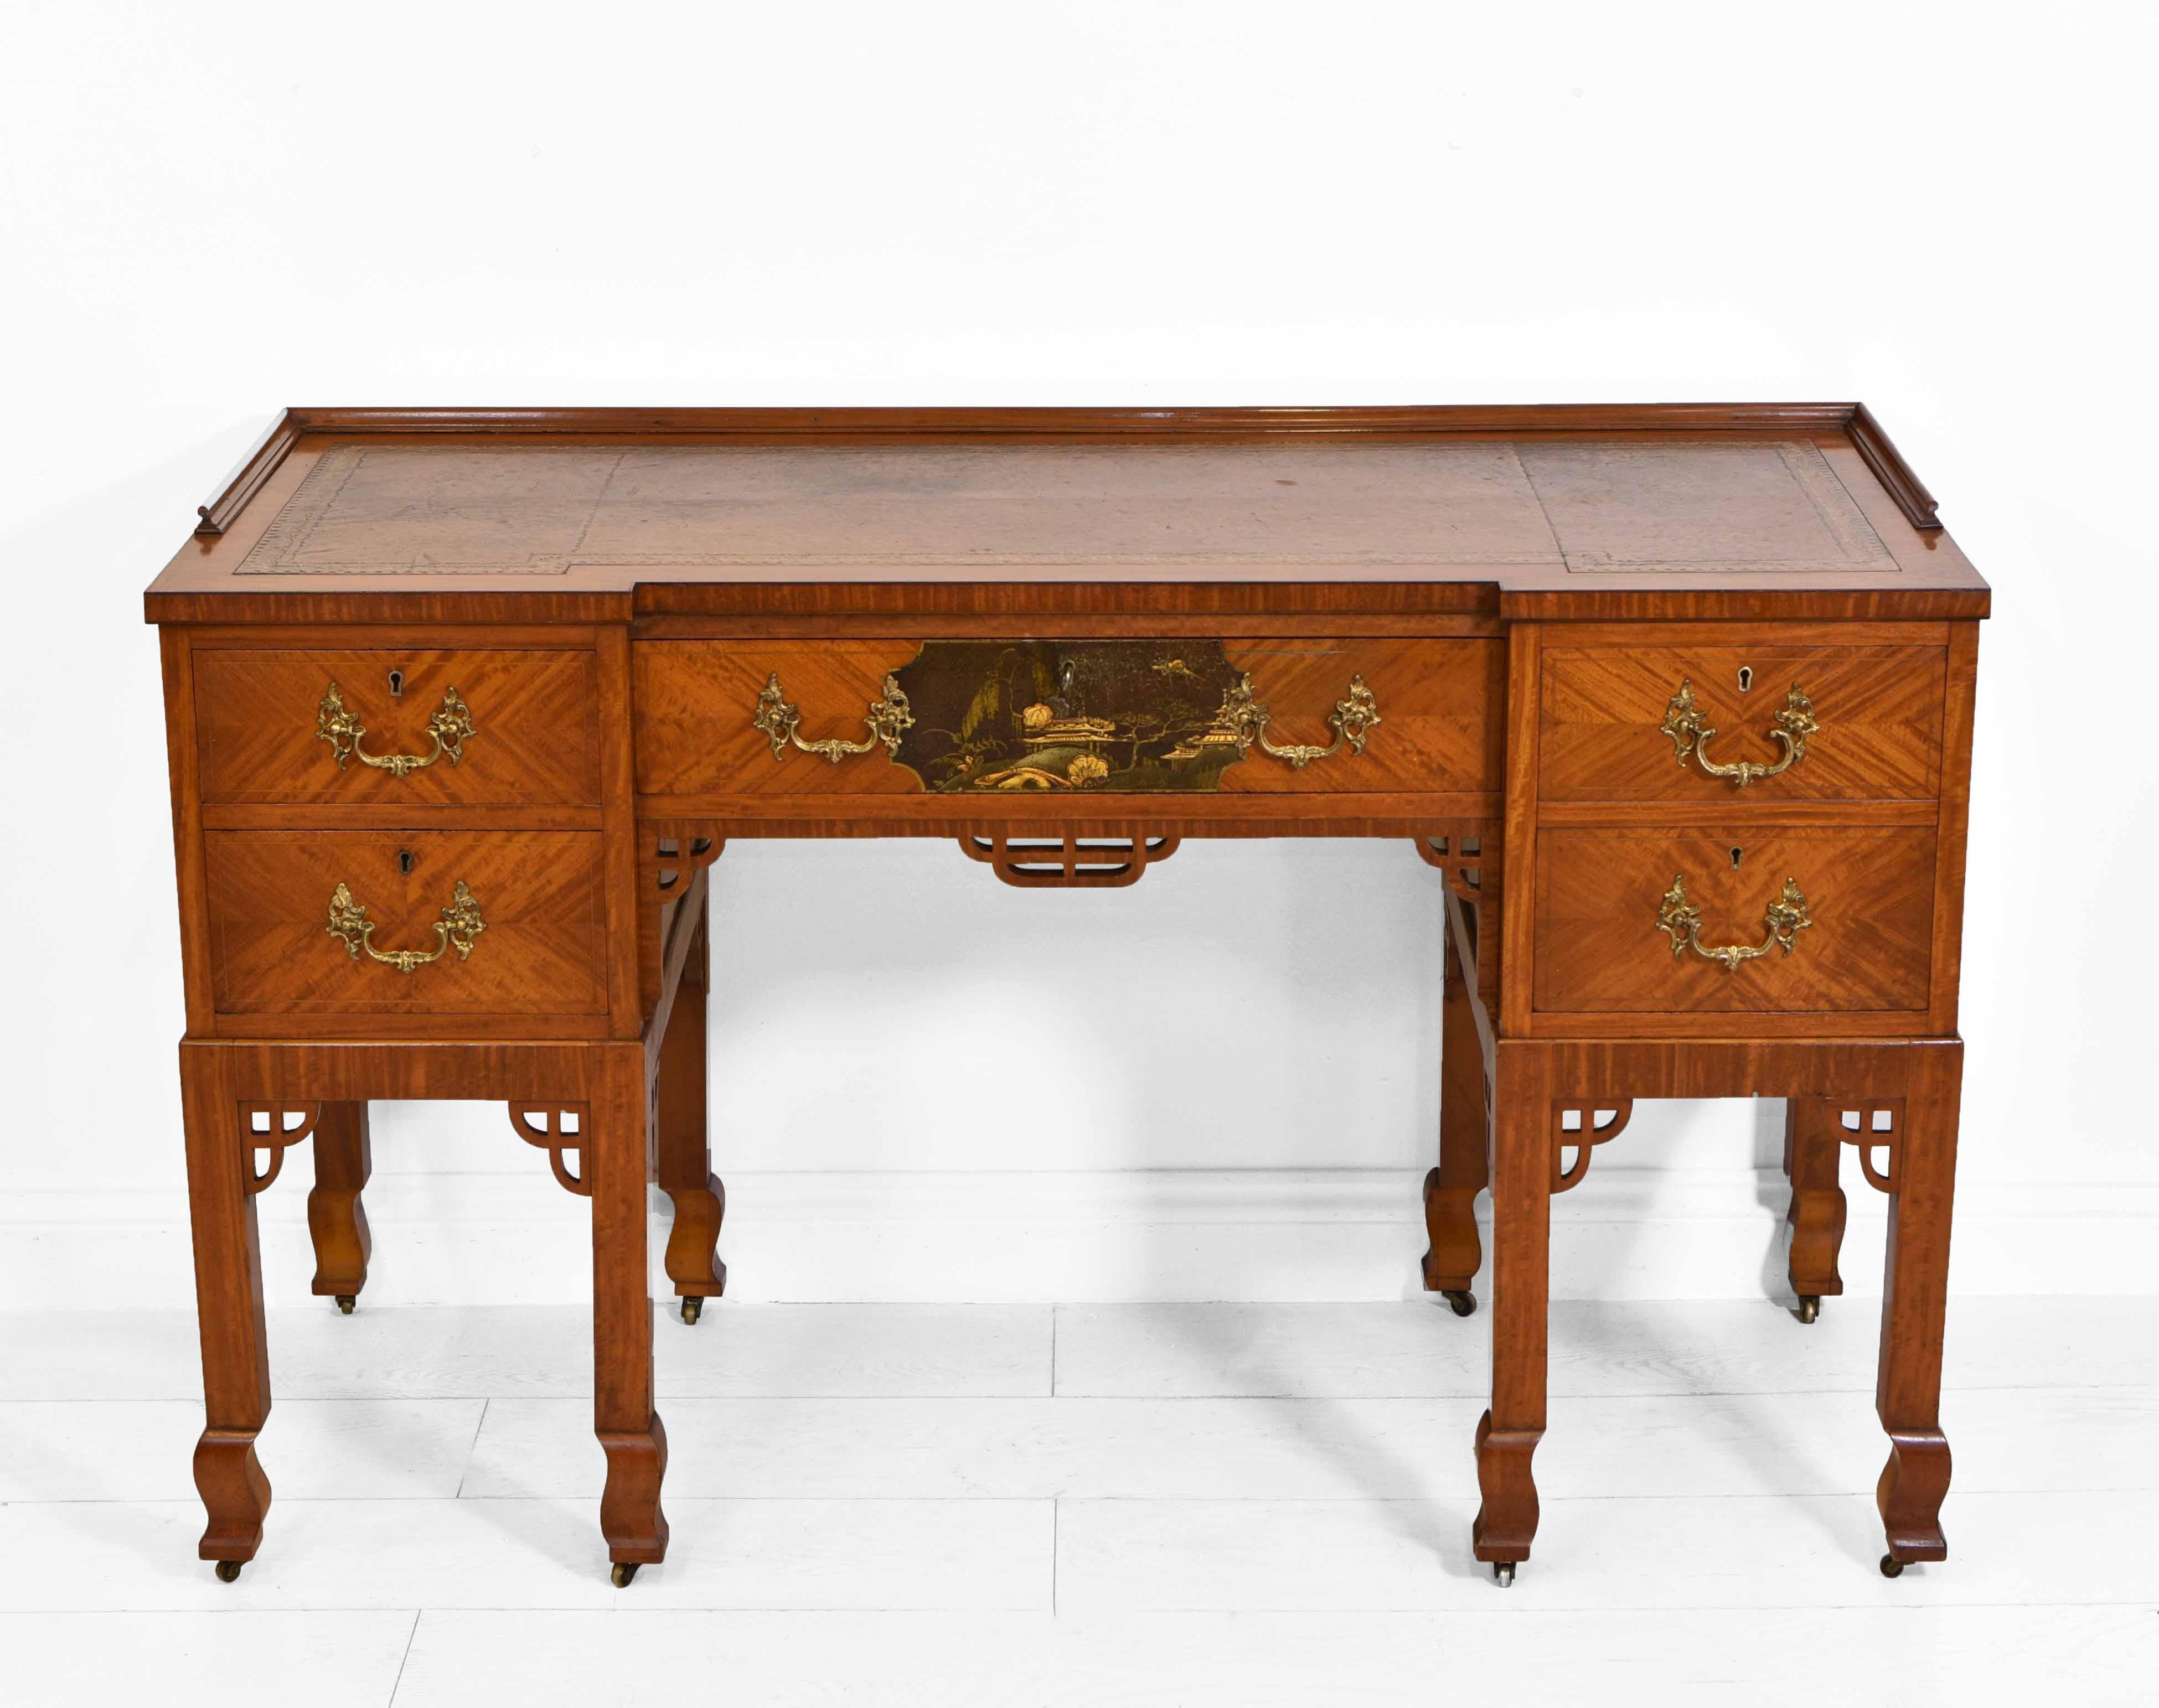 An antique Edwardian Japanese manner satinwood inverted breakfront desk, with leather and gilt tooled inset. English. Circa 1900.

This good quality desk has a small Japanned landscape scene to the central drawer, along with ornate gilt brass